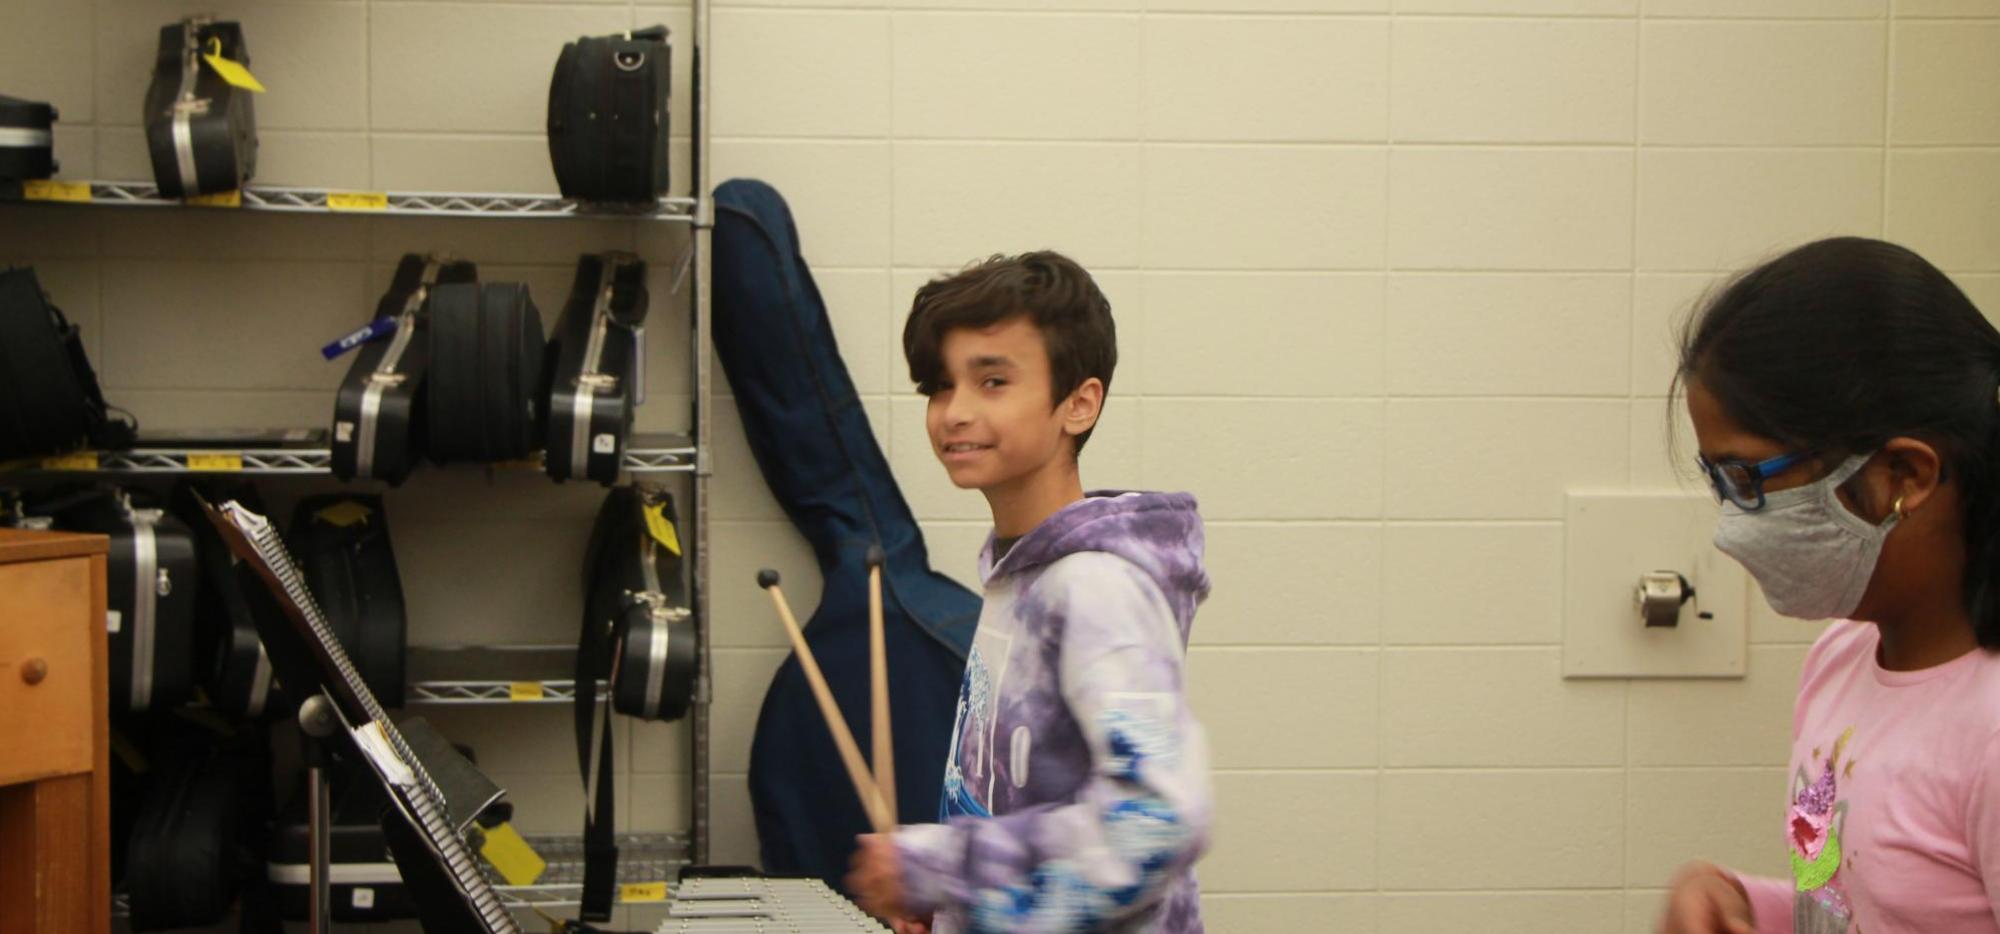 student in band class